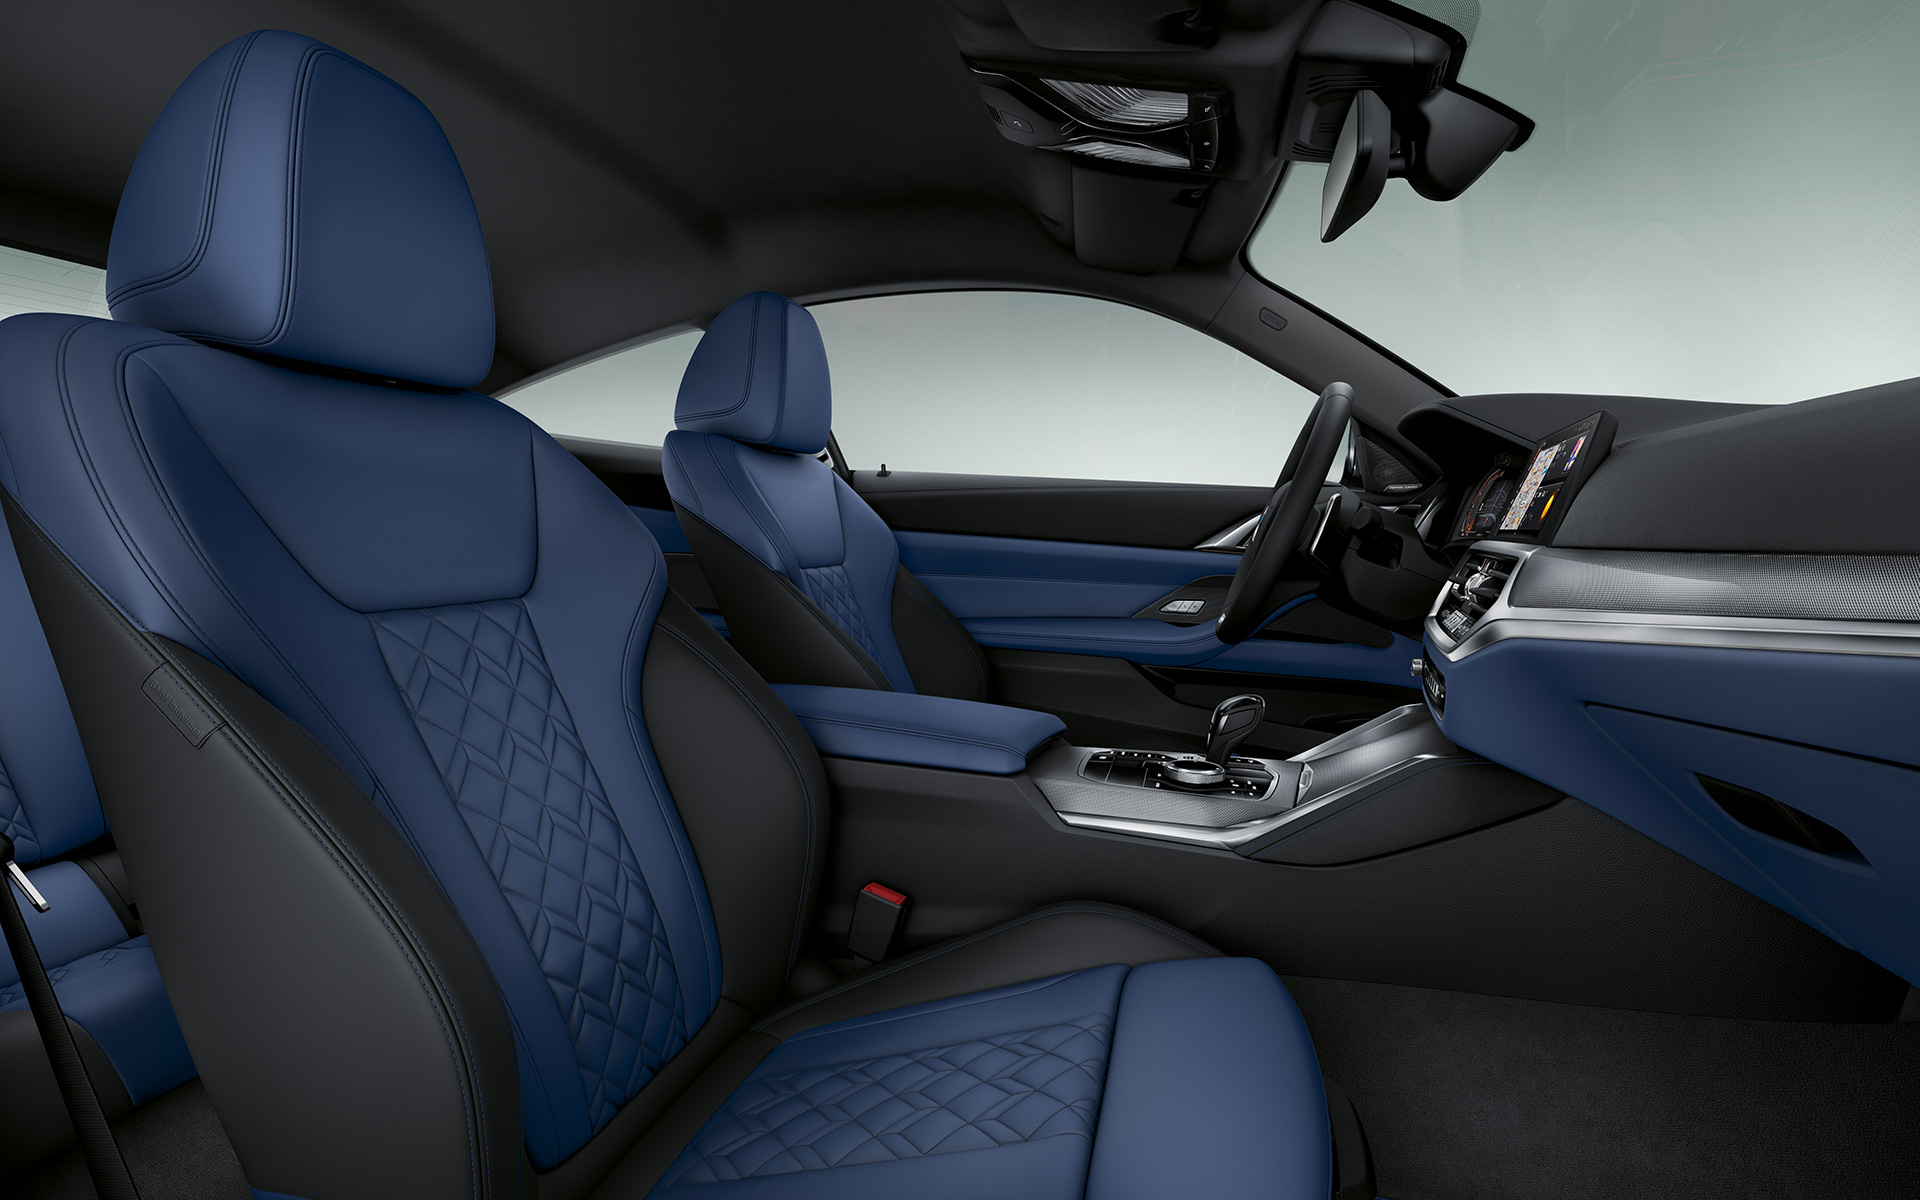 BMW Individual extended leather trim 'Merino' | Fjord Blue/Black BMW 4 Series Coupé Individual 2020 G22 